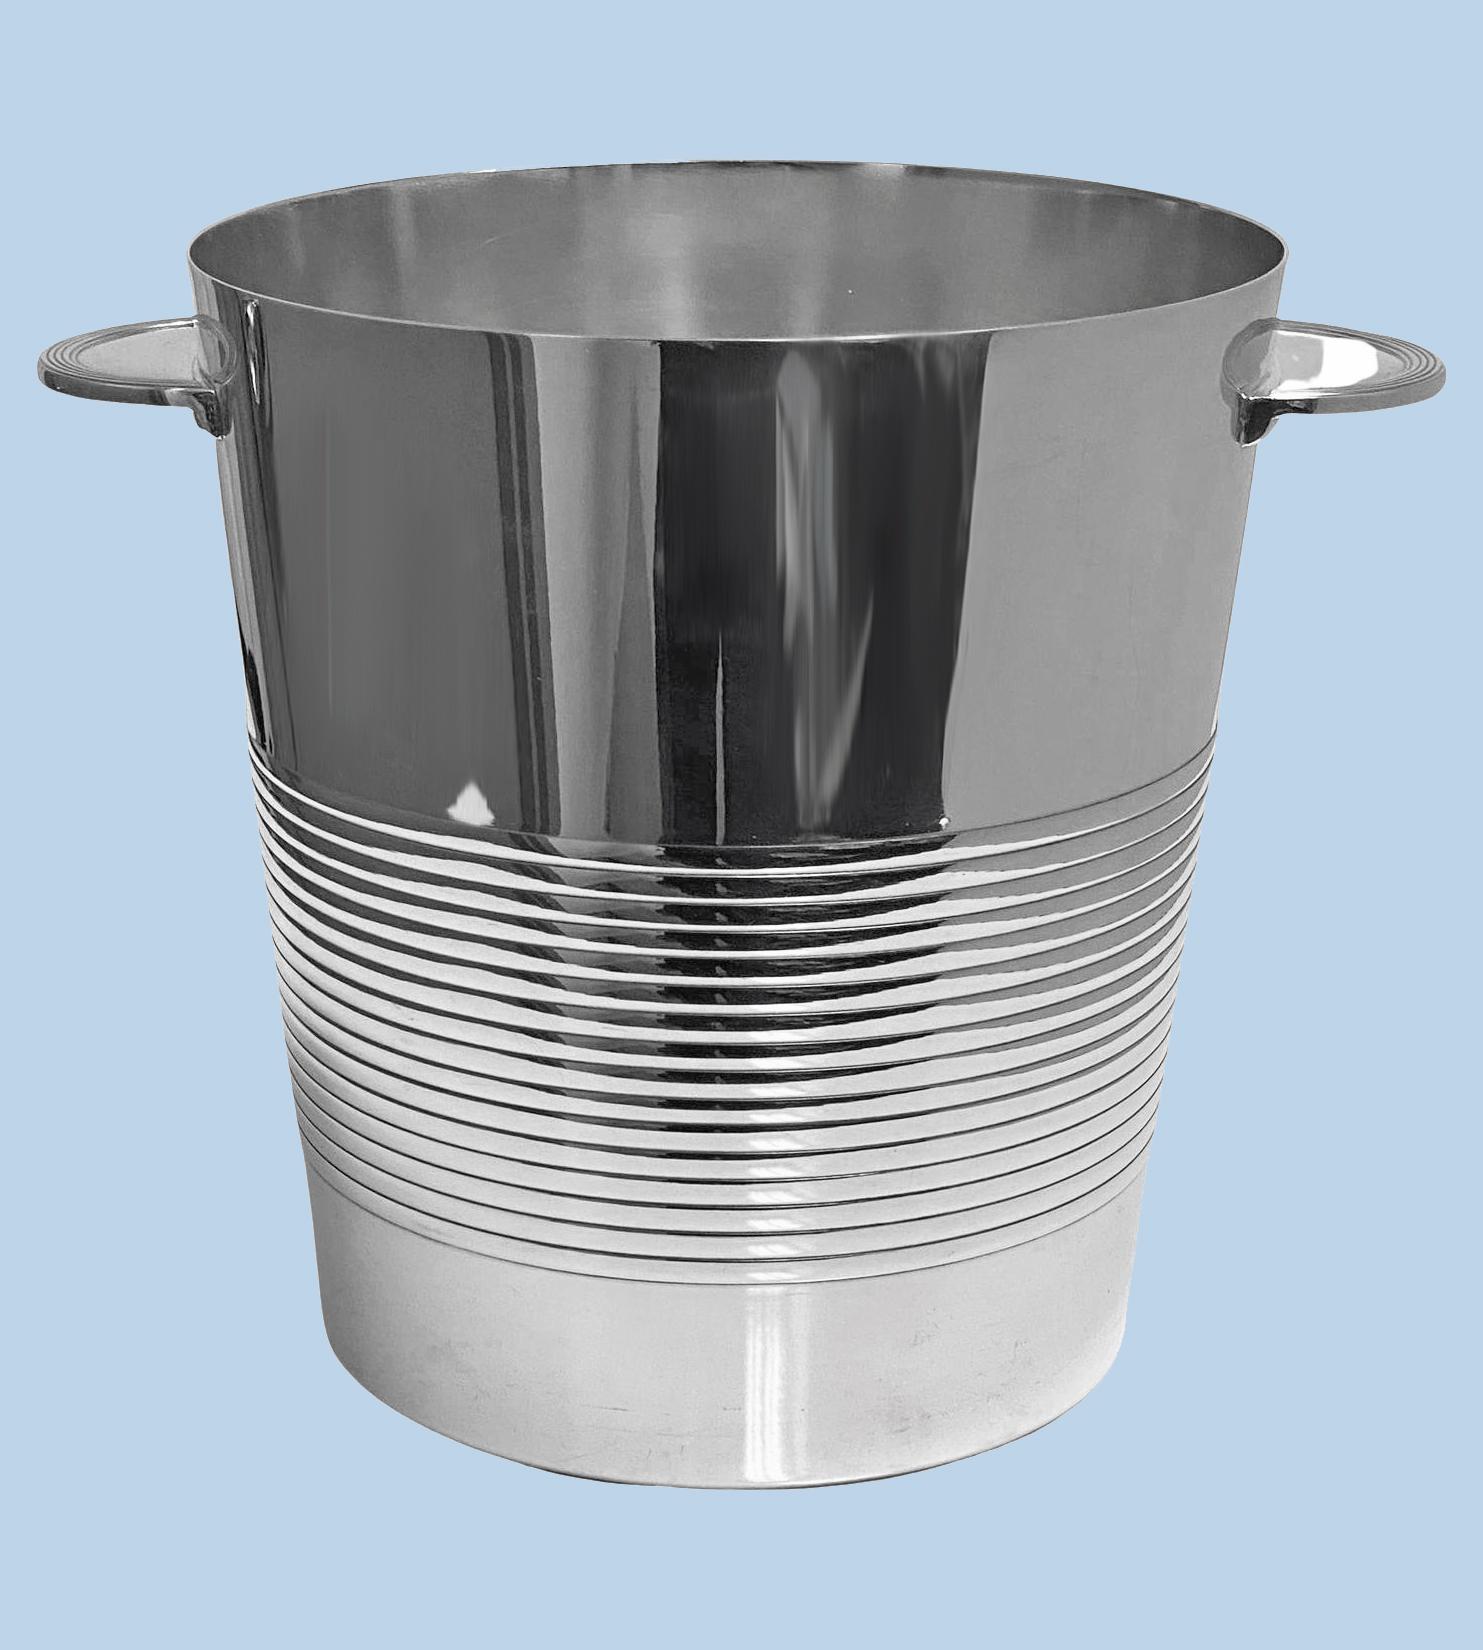 Christofle Art Deco design Luc Lanel Silver plate Wine Bucket Cooler, C.1950. This Art Deco design model, Vulcan, was designed for the Ile-de-France ocean liner in 1927. Height: approximately 8 1/8 inches. Christofle marks on base. Ref: P26 Lanel